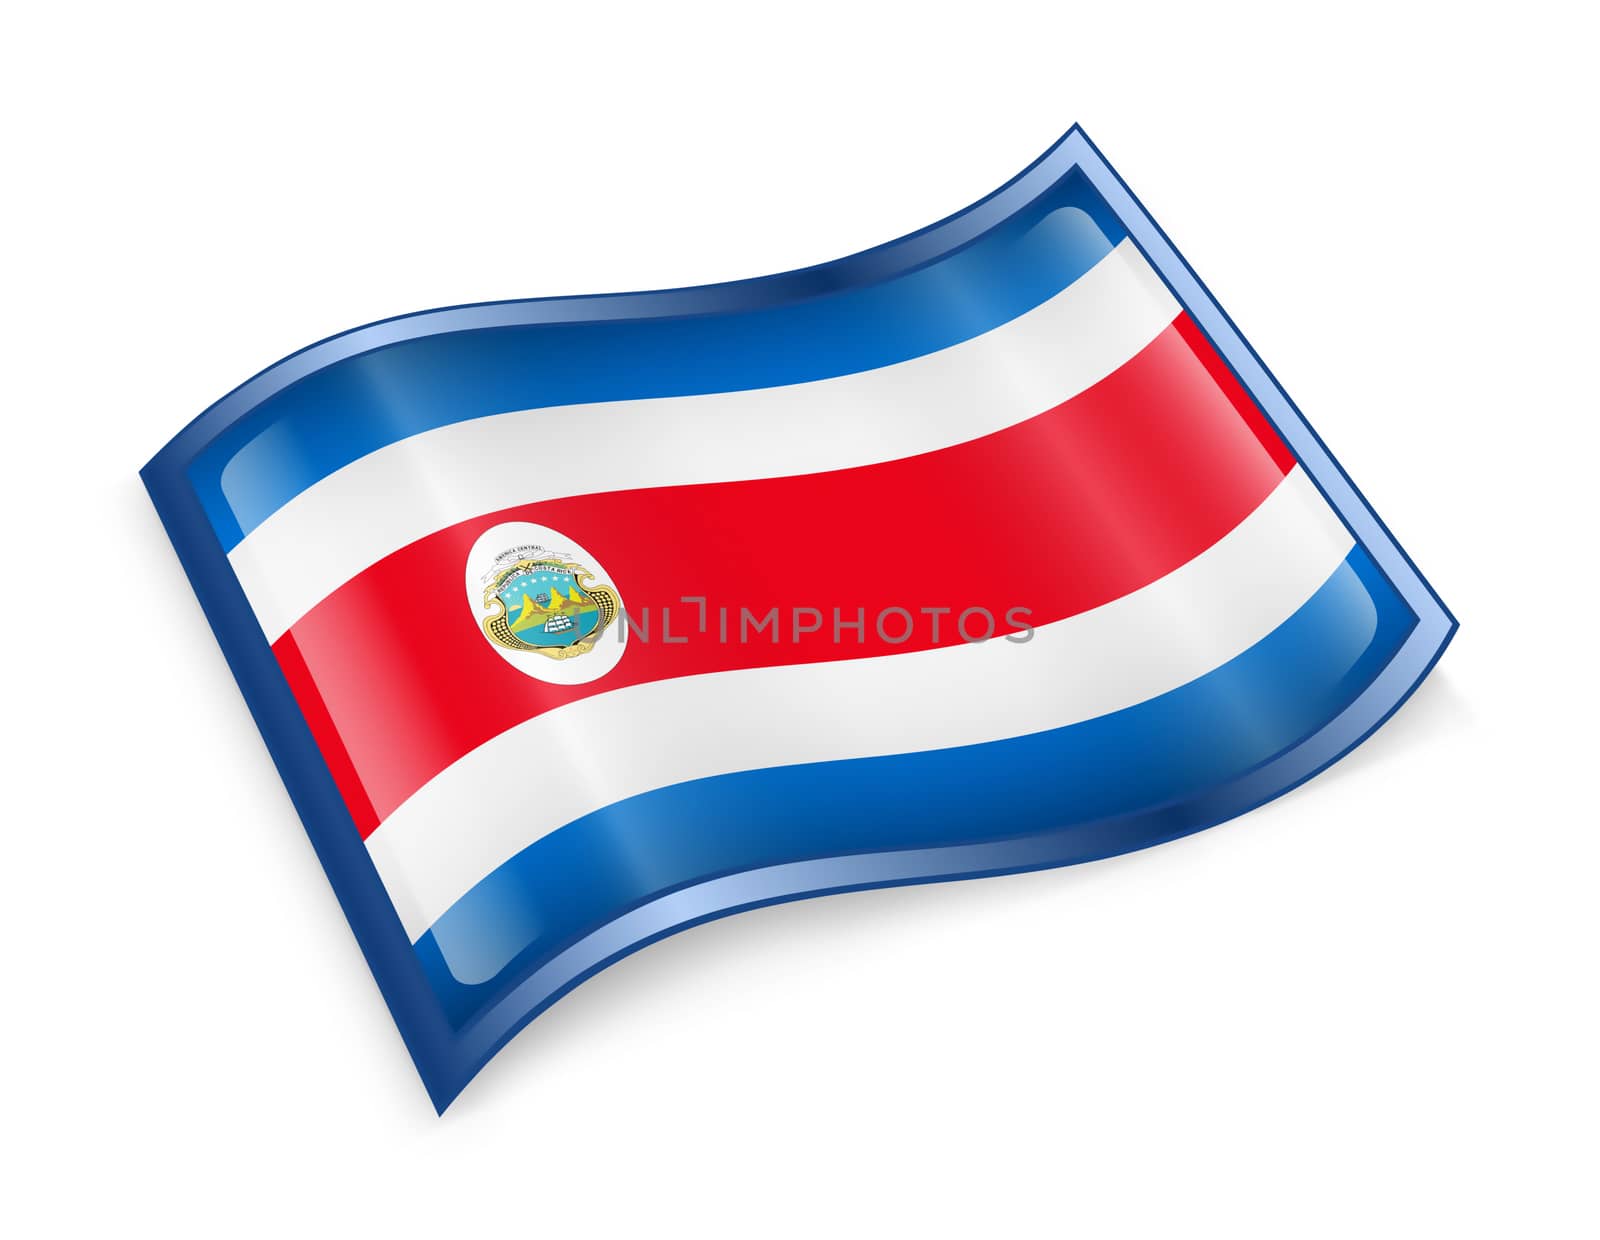 Costa Rica flag icon, isolated on white background.